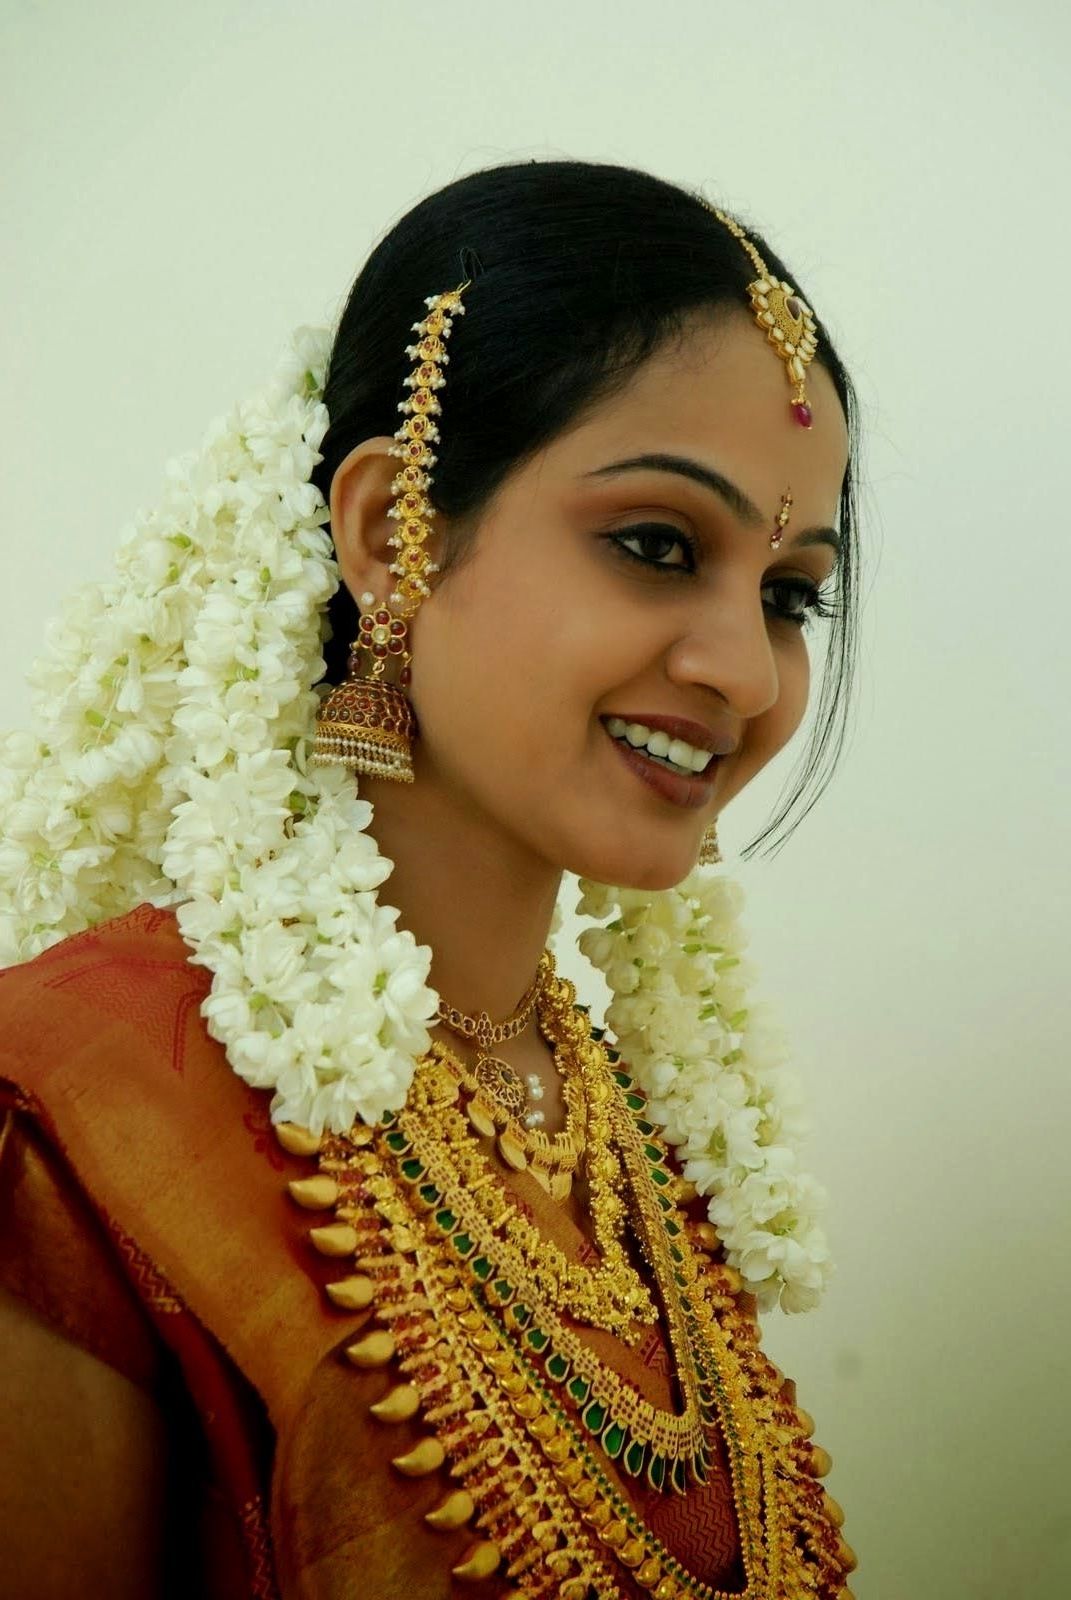 Hindu Wedding Hairstyles Kerala Hindu Bridal Hairstyles Pictures Within Most Current South Indian Tamil Bridal Wedding Hairstyles (View 3 of 15)